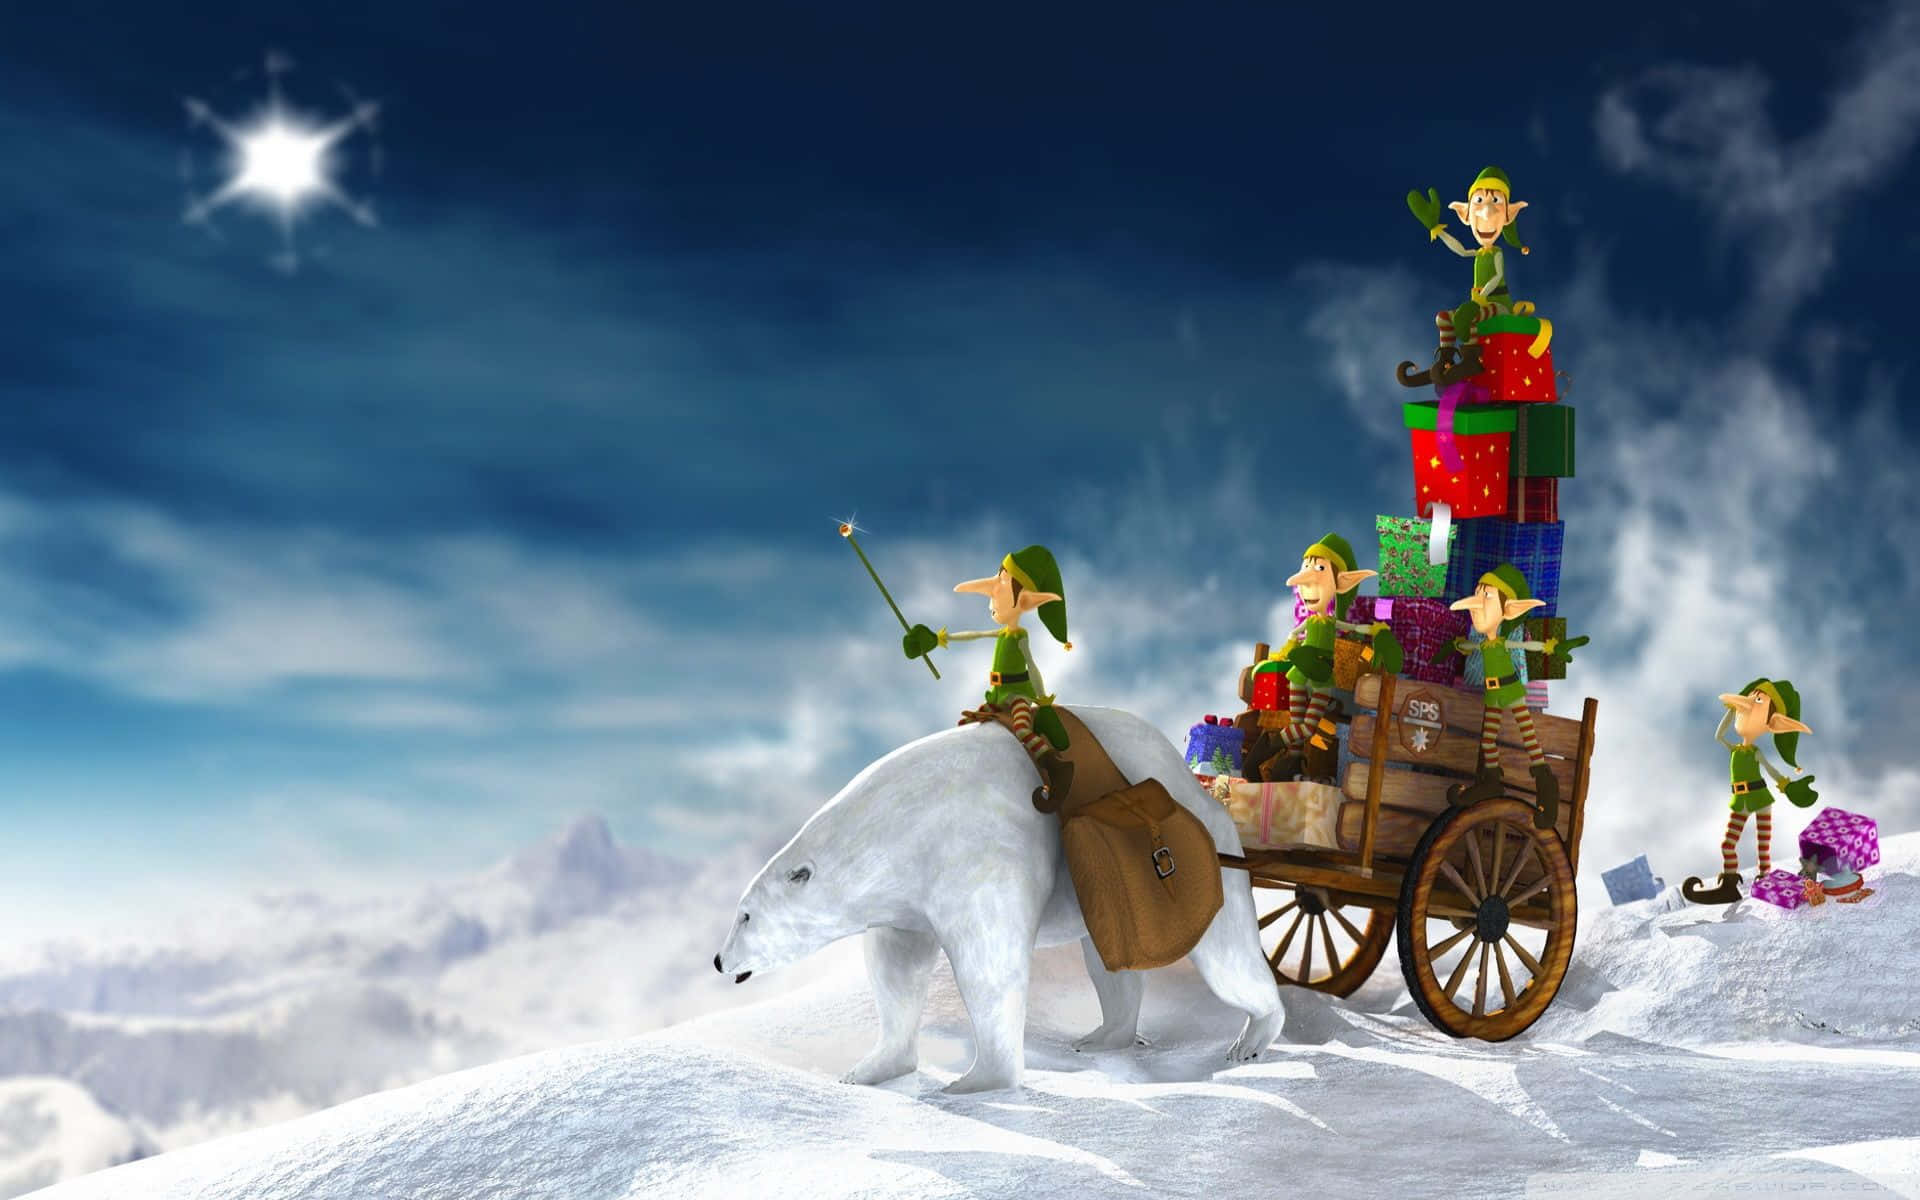 "Happy Christmas Elf Playing With Toys" Wallpaper